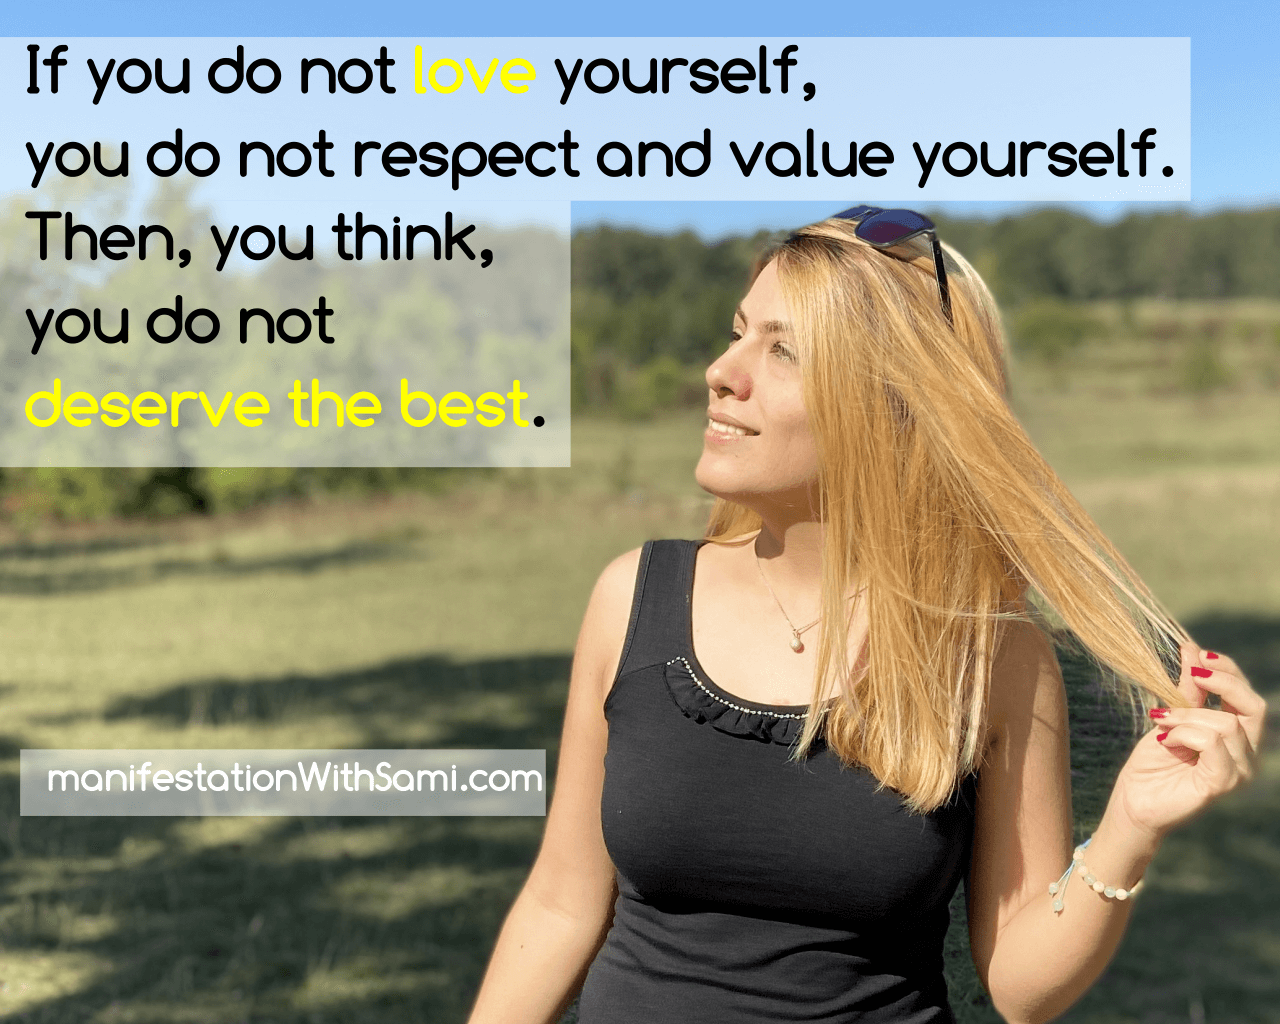 Love and respect yourself, because you deserve the best